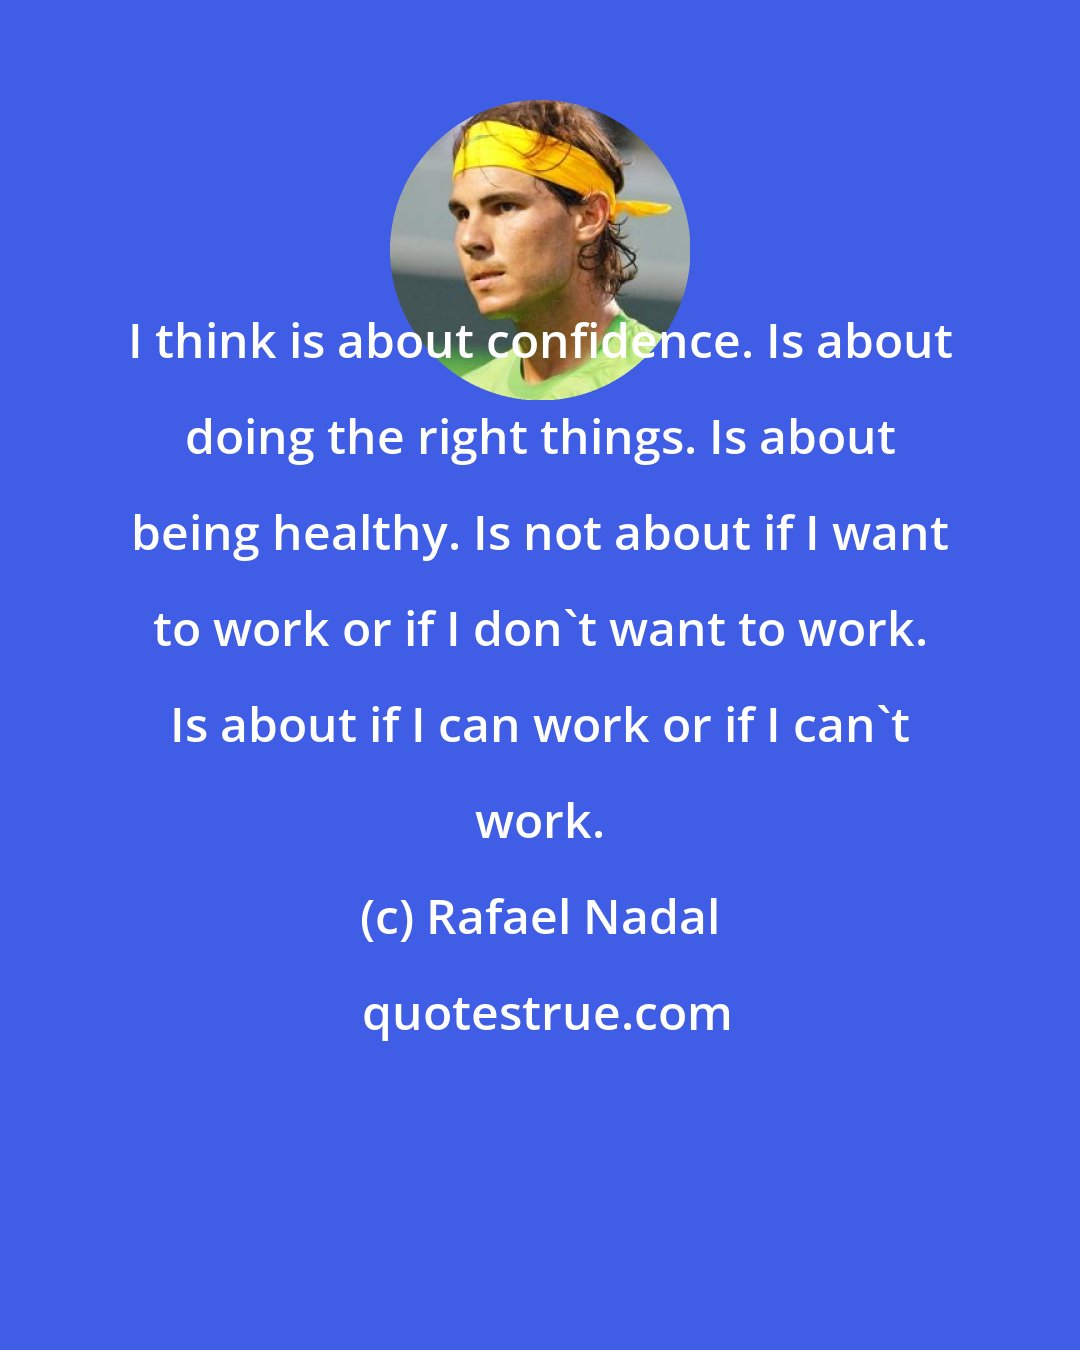 Rafael Nadal: I think is about confidence. Is about doing the right things. Is about being healthy. Is not about if I want to work or if I don't want to work. Is about if I can work or if I can't work.